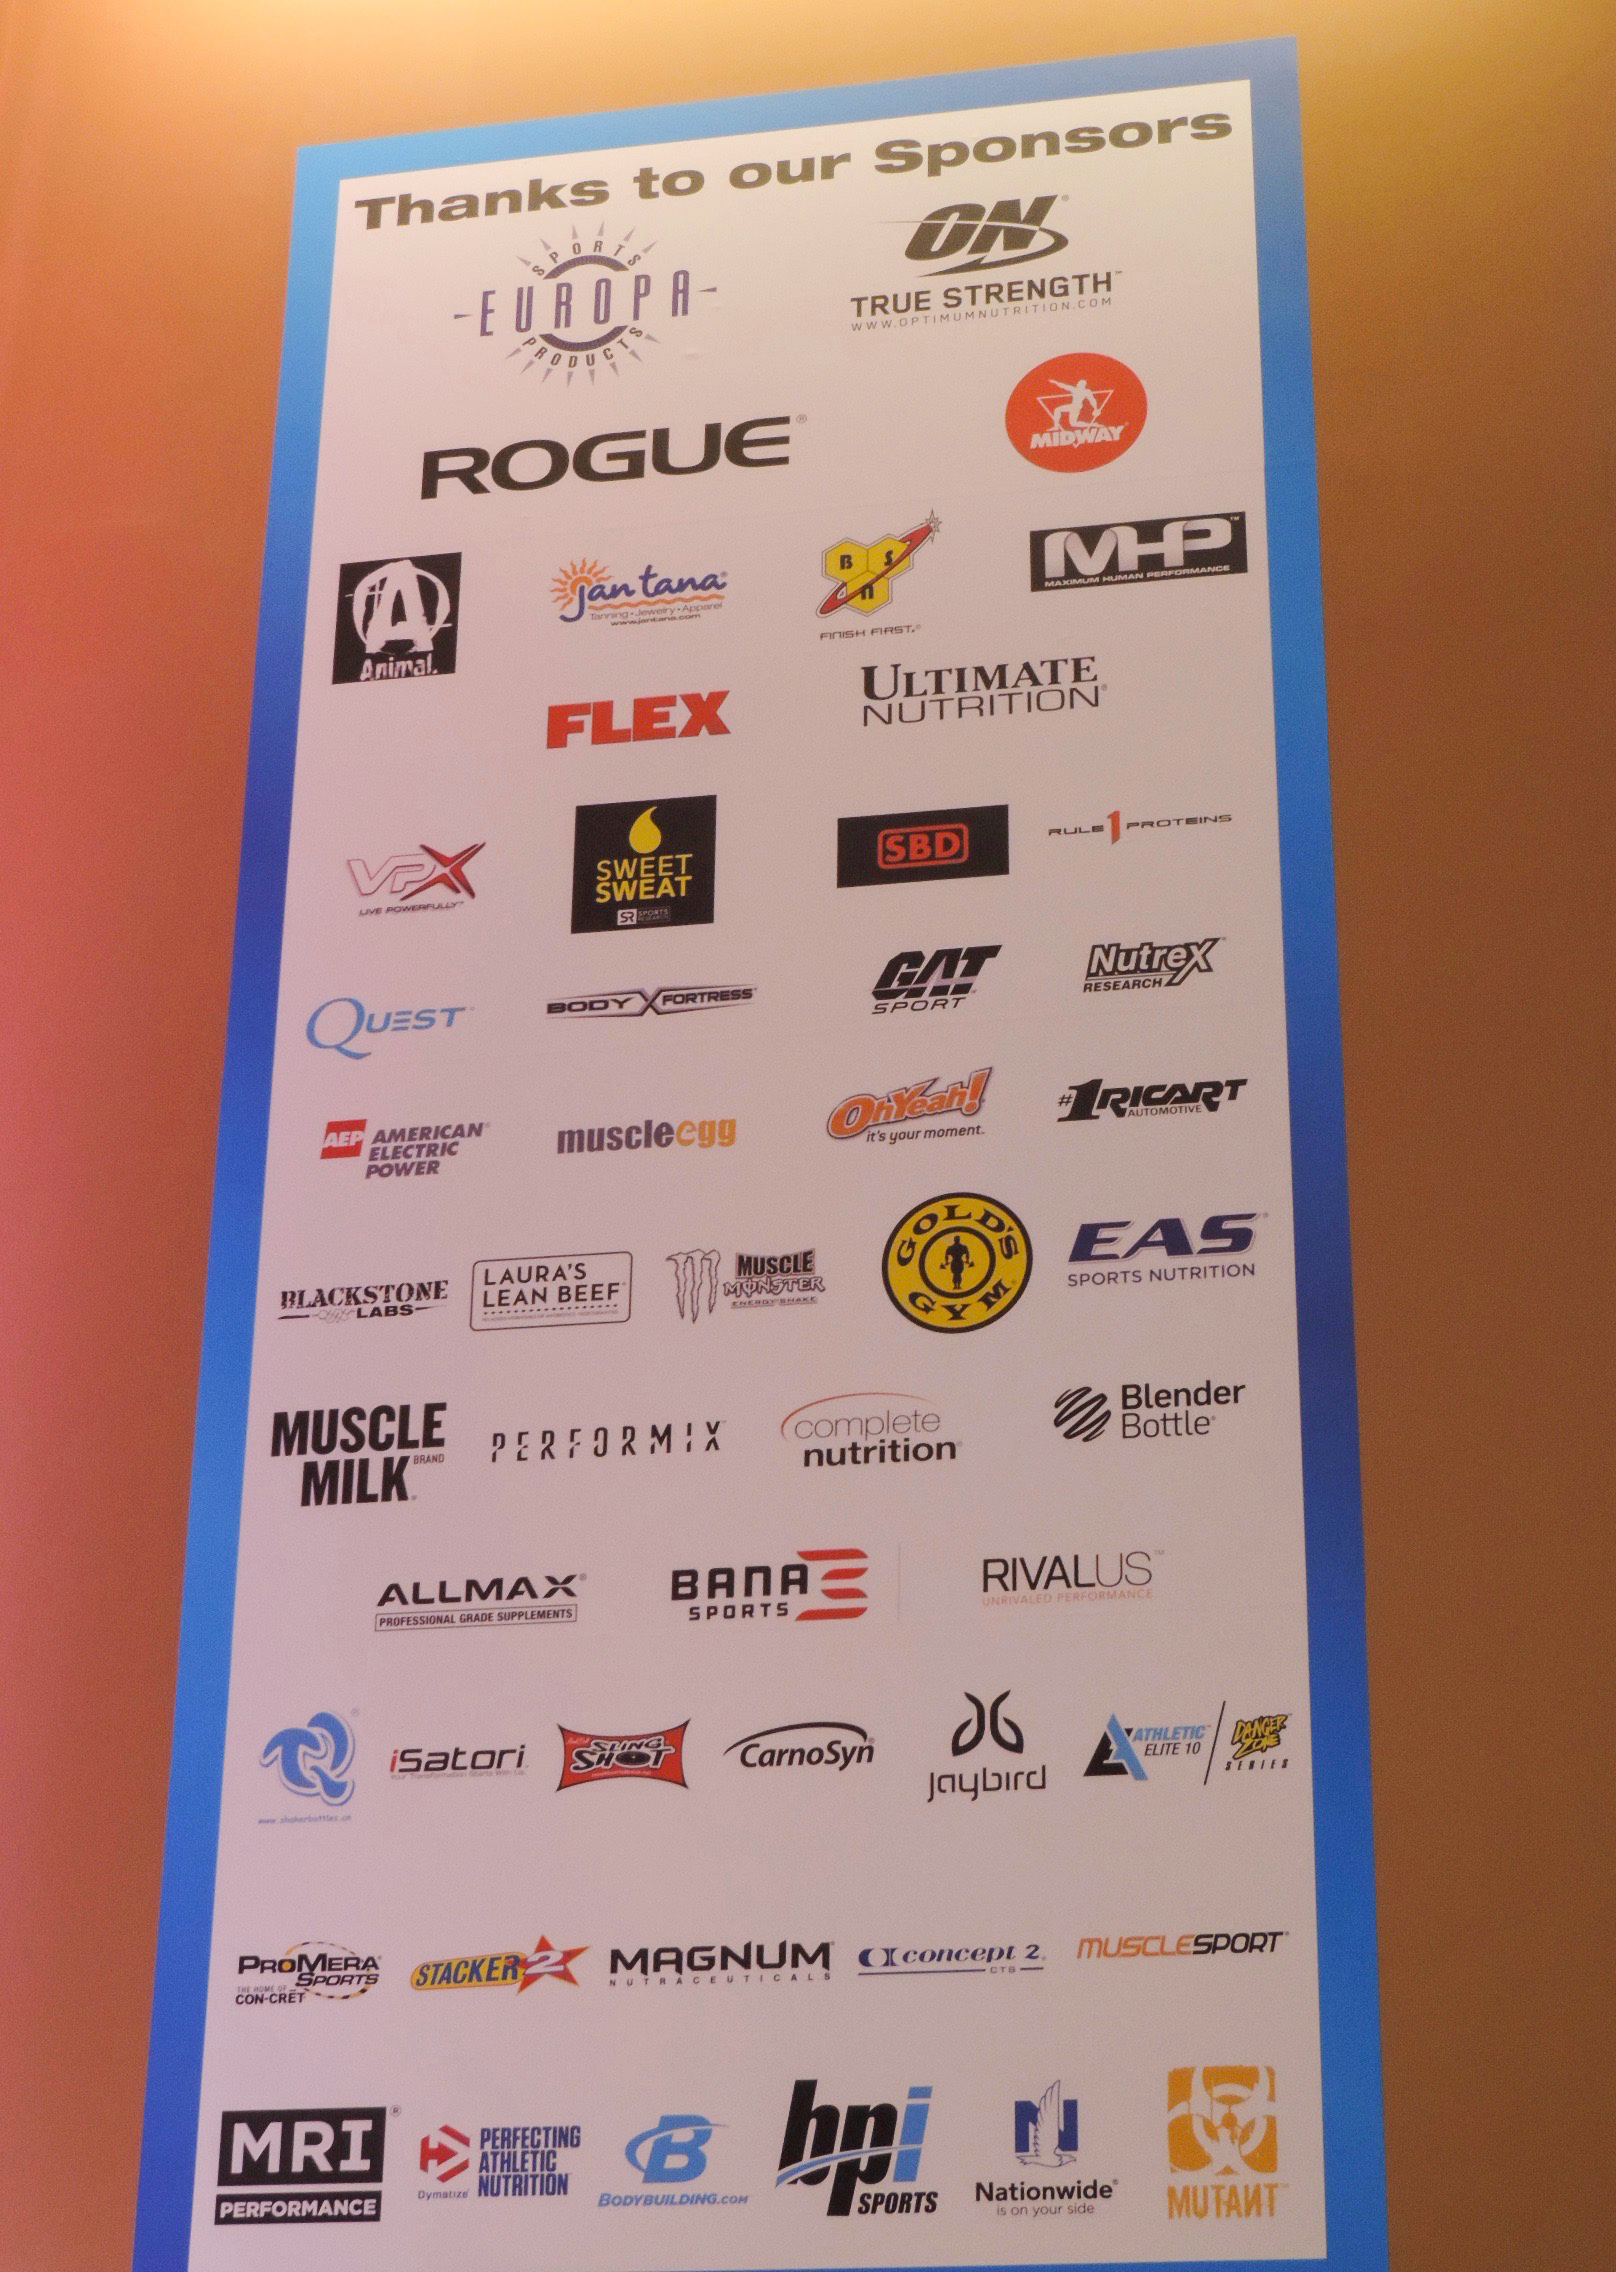 Sponsor banner. Midway Labs USA!